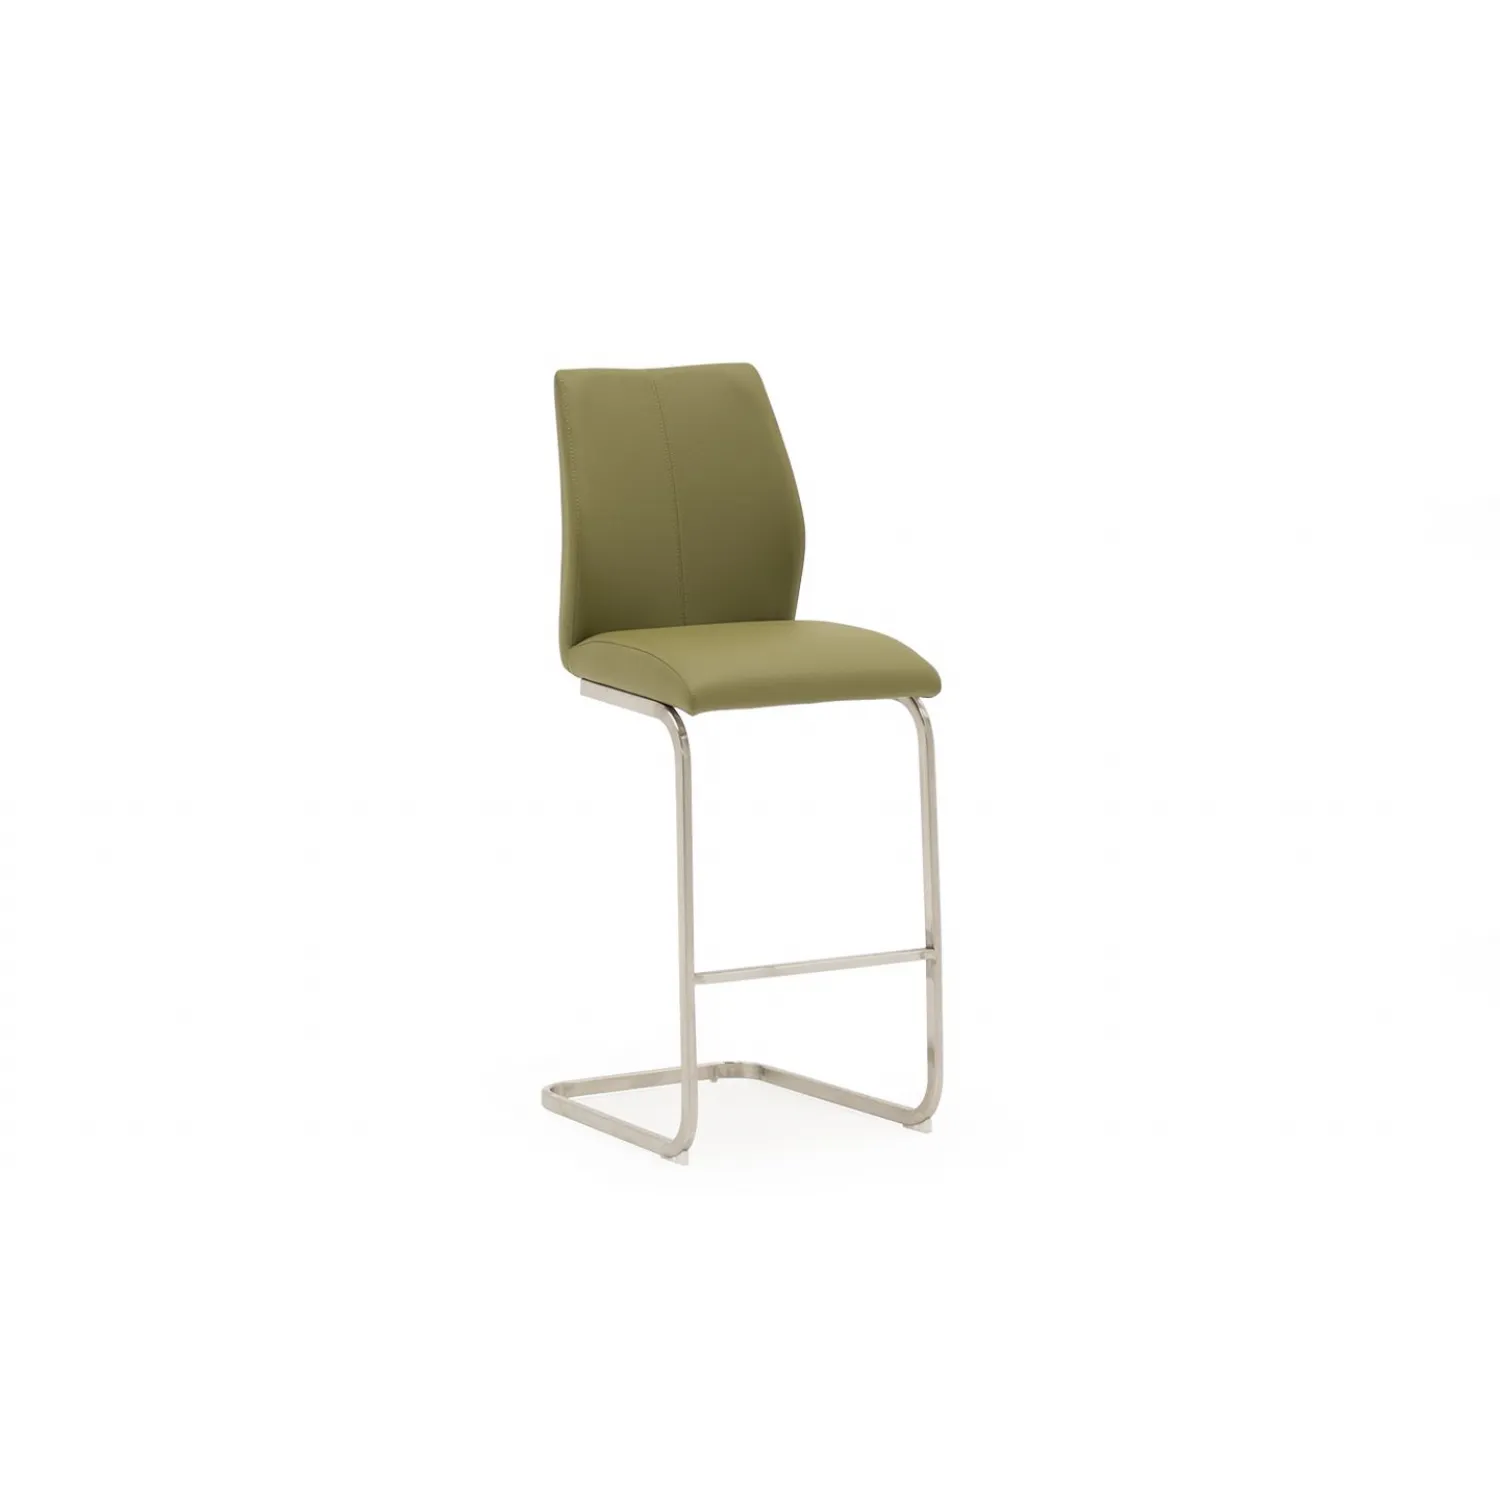 Olive Green Leather Bar Stool Brushed Steel Cantilever Legs